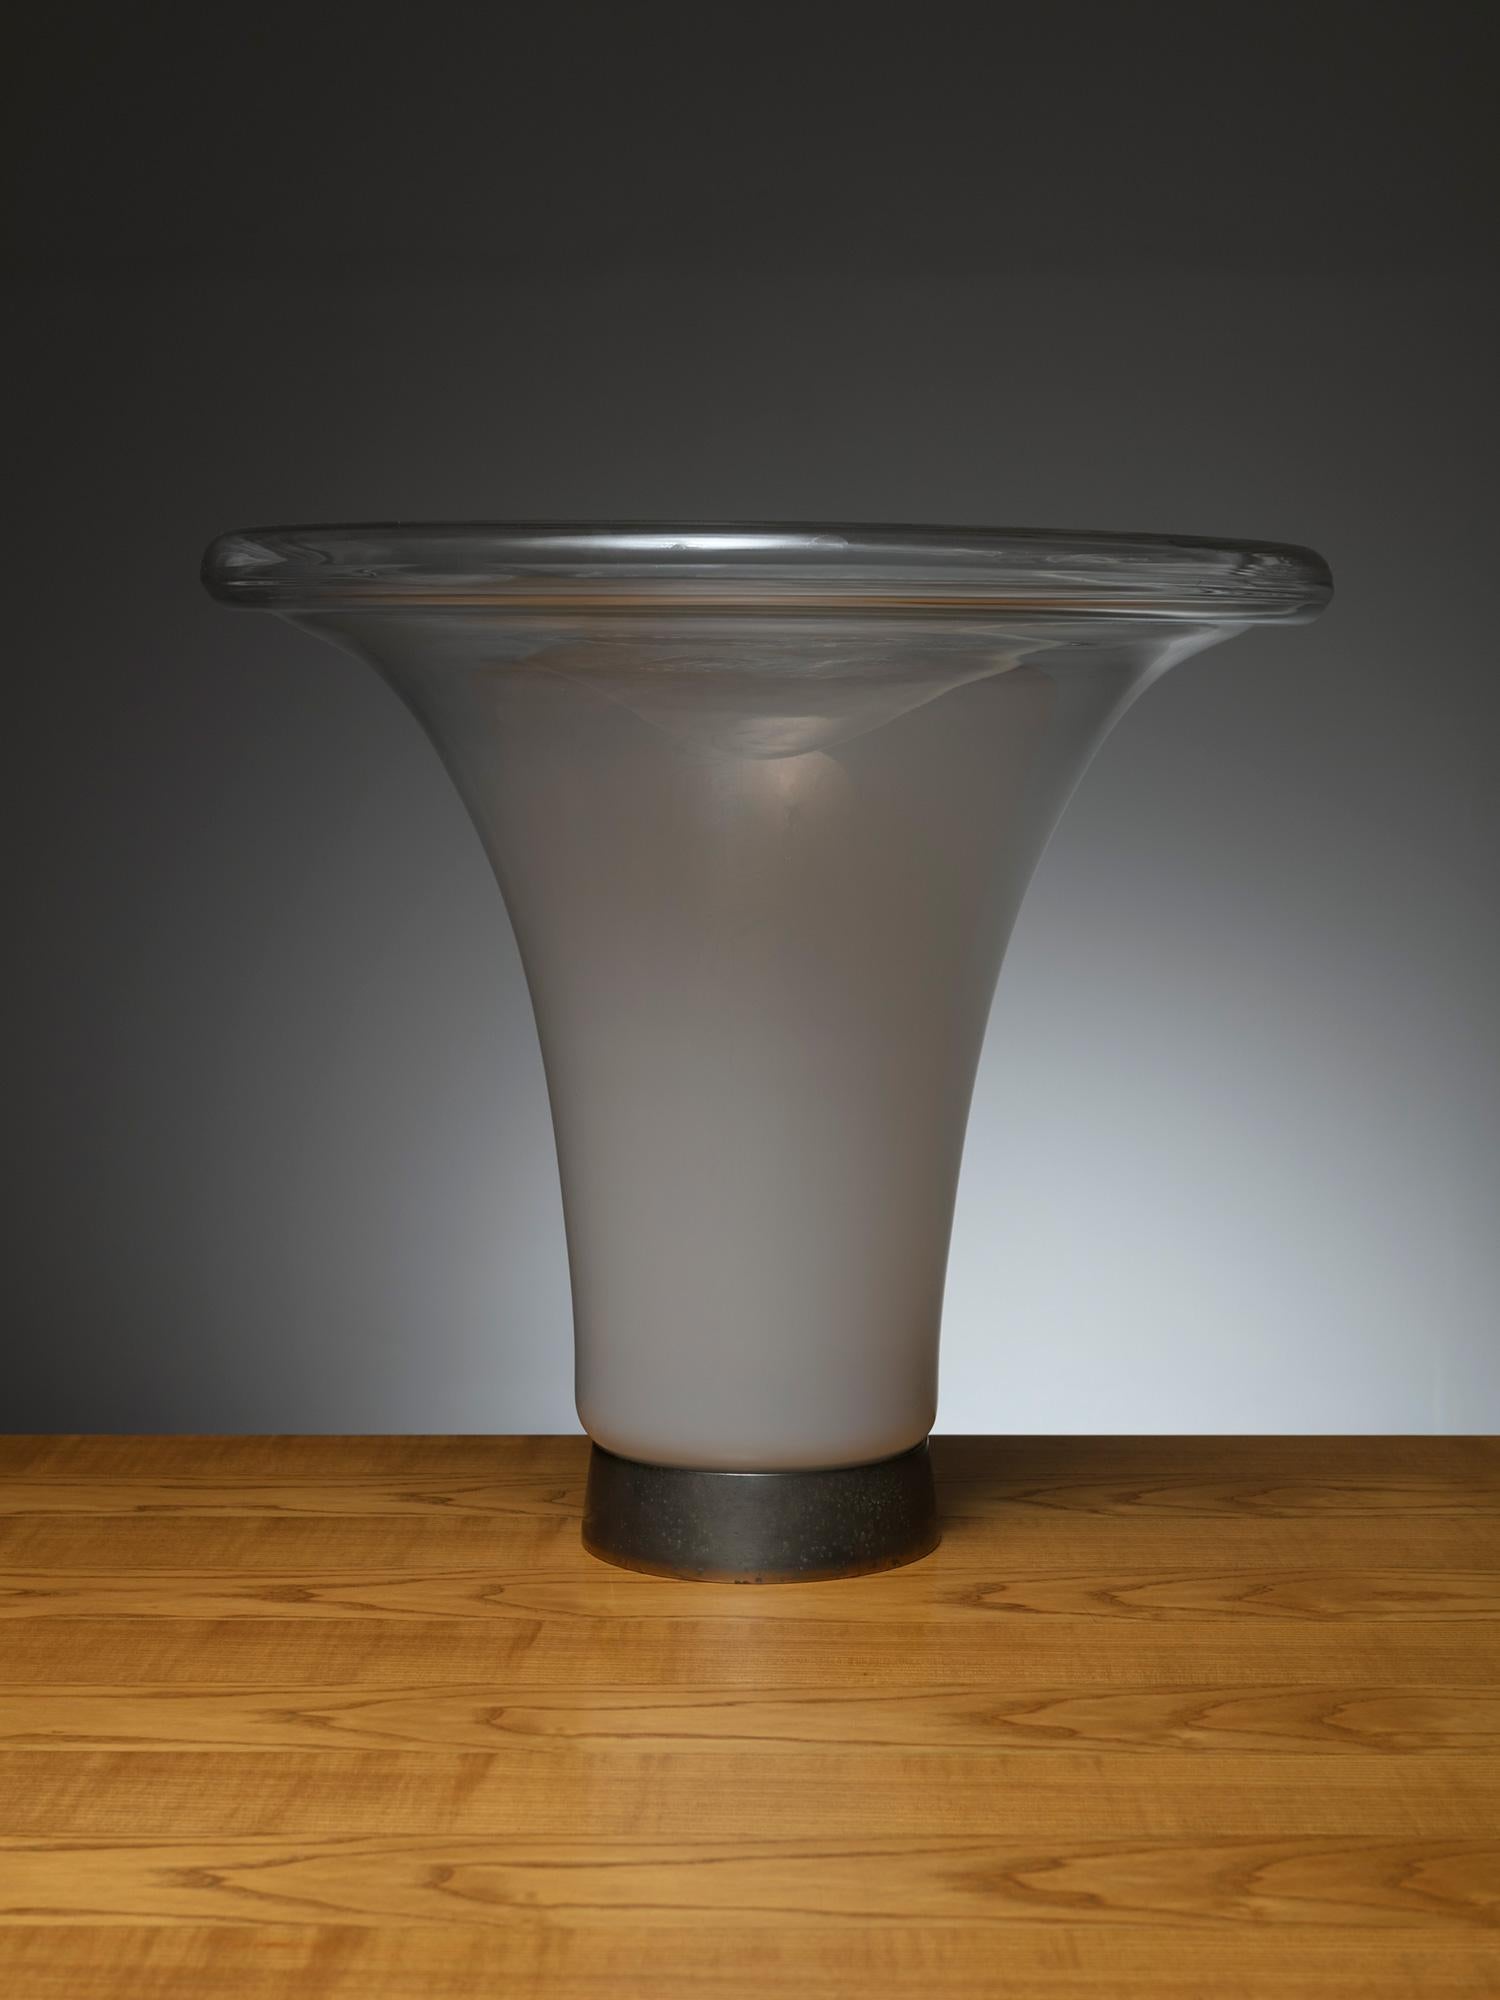 Large Murano glass table lamp model L261 by Vistosi.